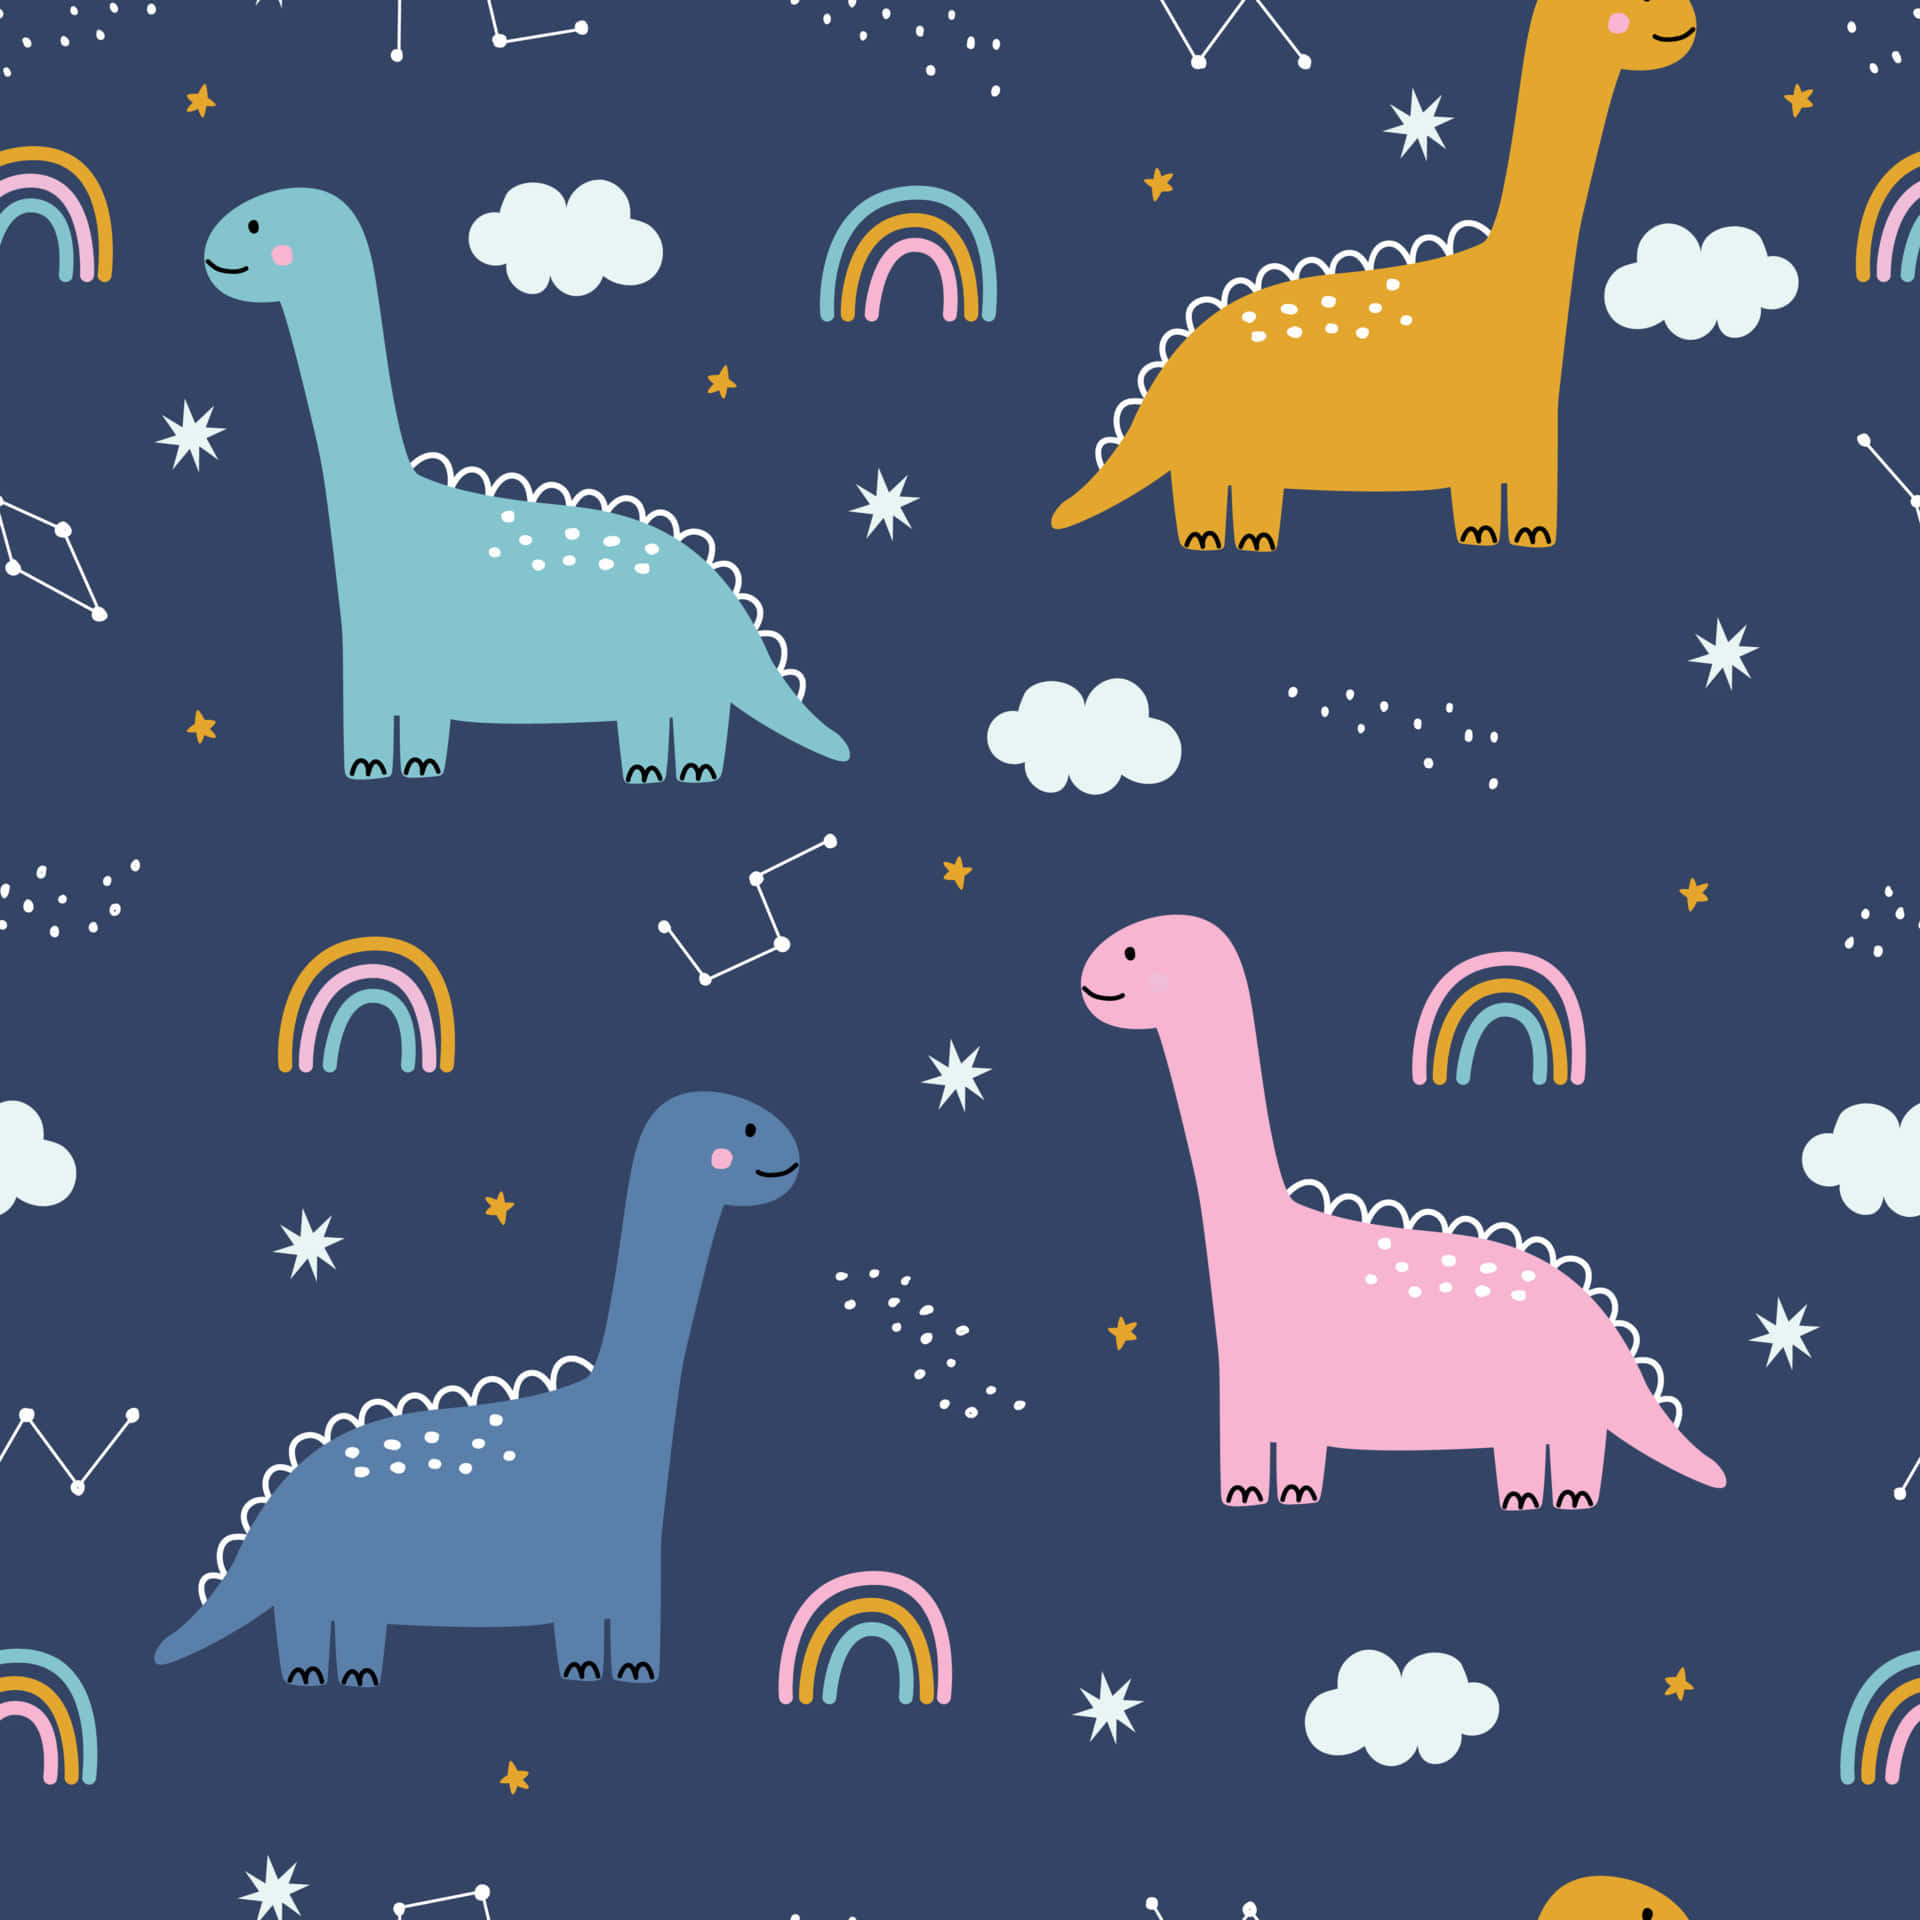 Look at these Adorable Cartoon Animals Snuggled Together Wallpaper